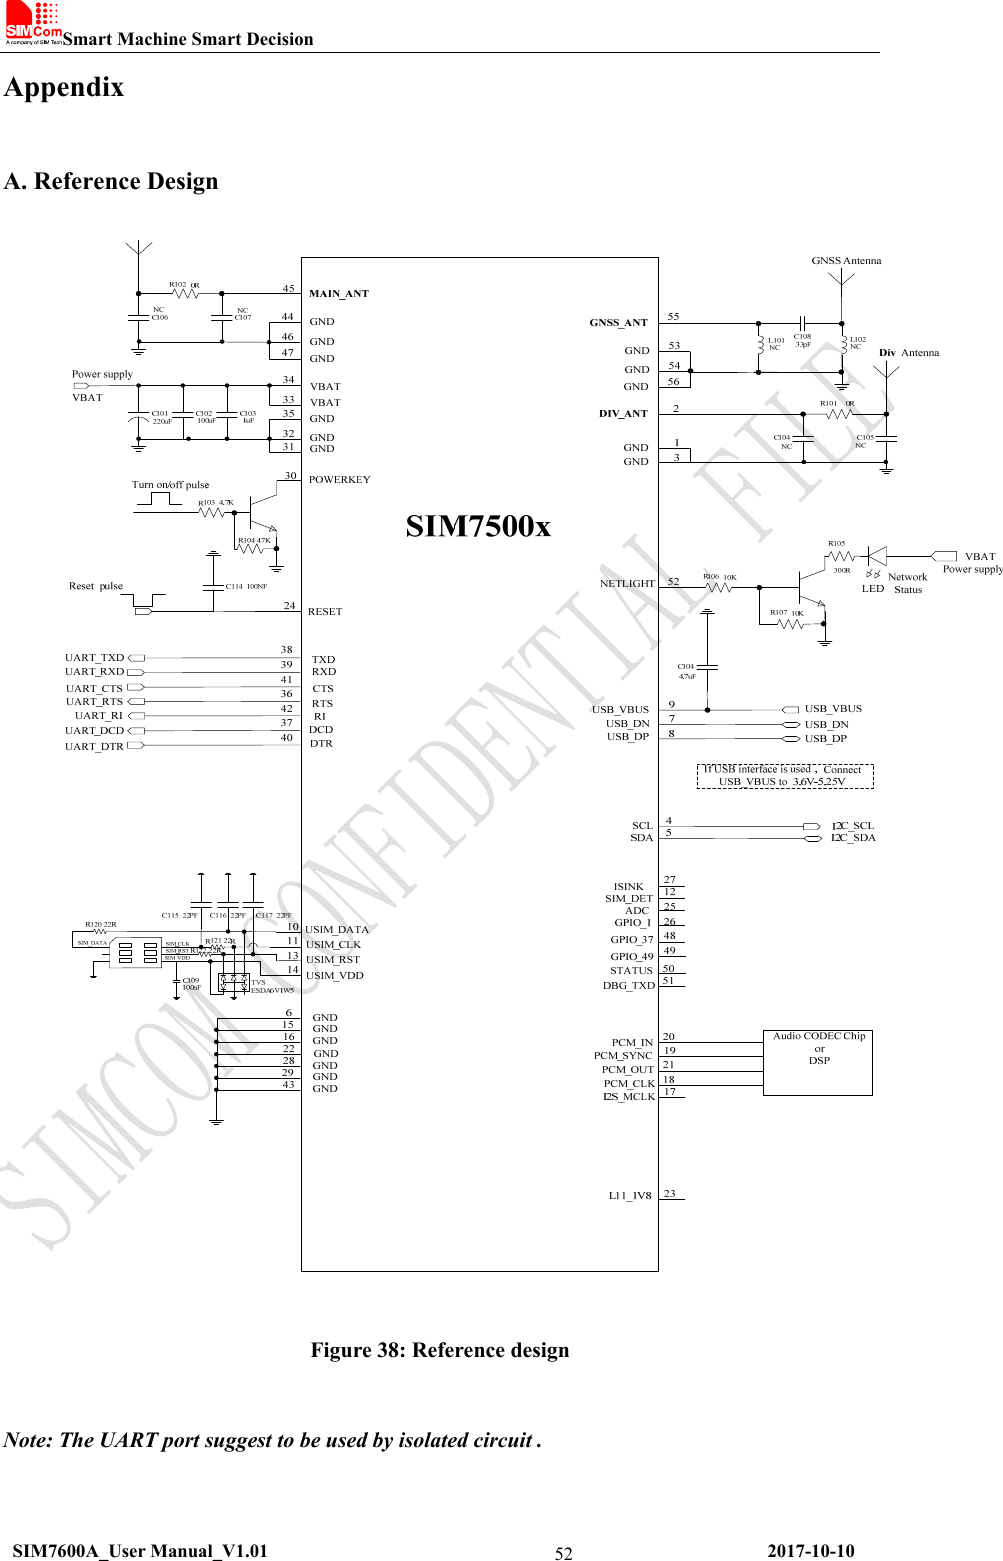 Smart Machine Smart Decision  SIM7600A_User Manual_V1.01                                                     2017-10-10 52Appendix A. Reference Design  Figure 38: Reference design  Note: The UART port suggest to be used by isolated circuit .   